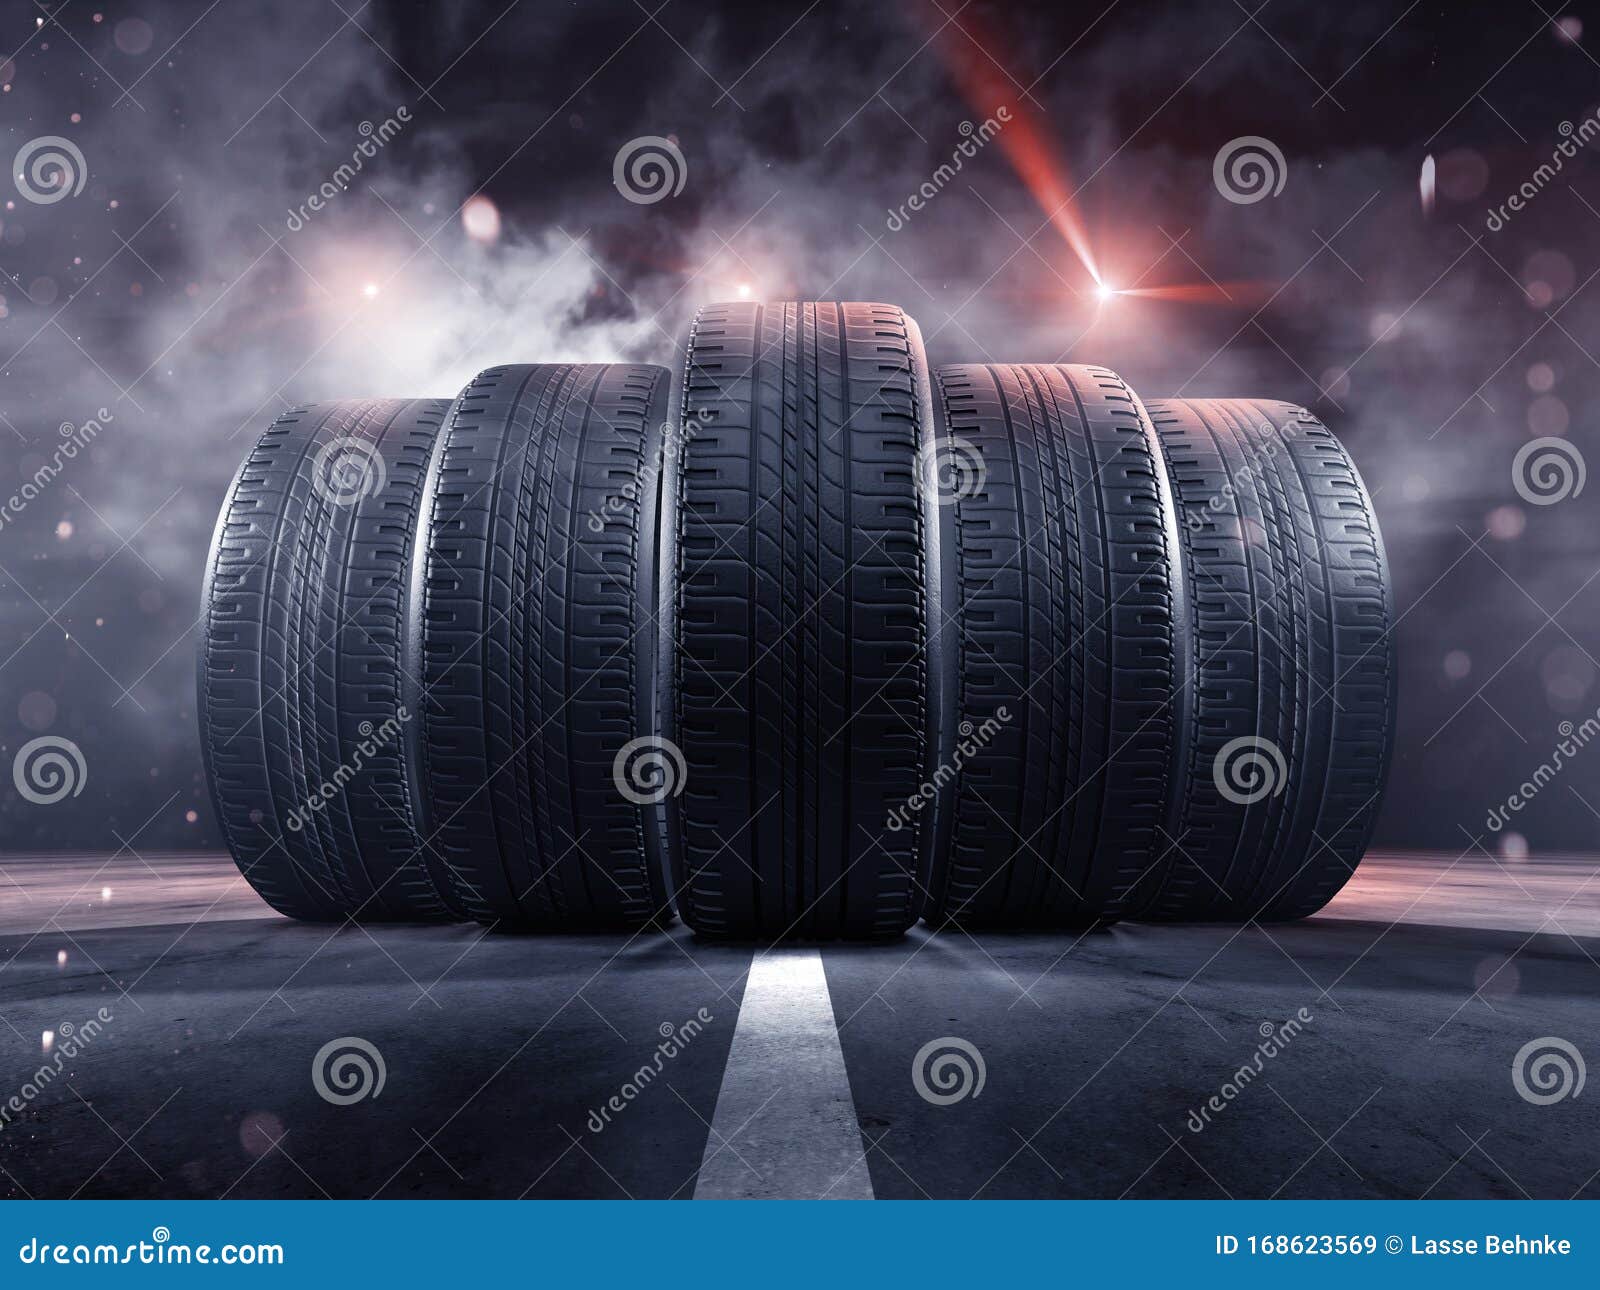 five tyres rolling on a street